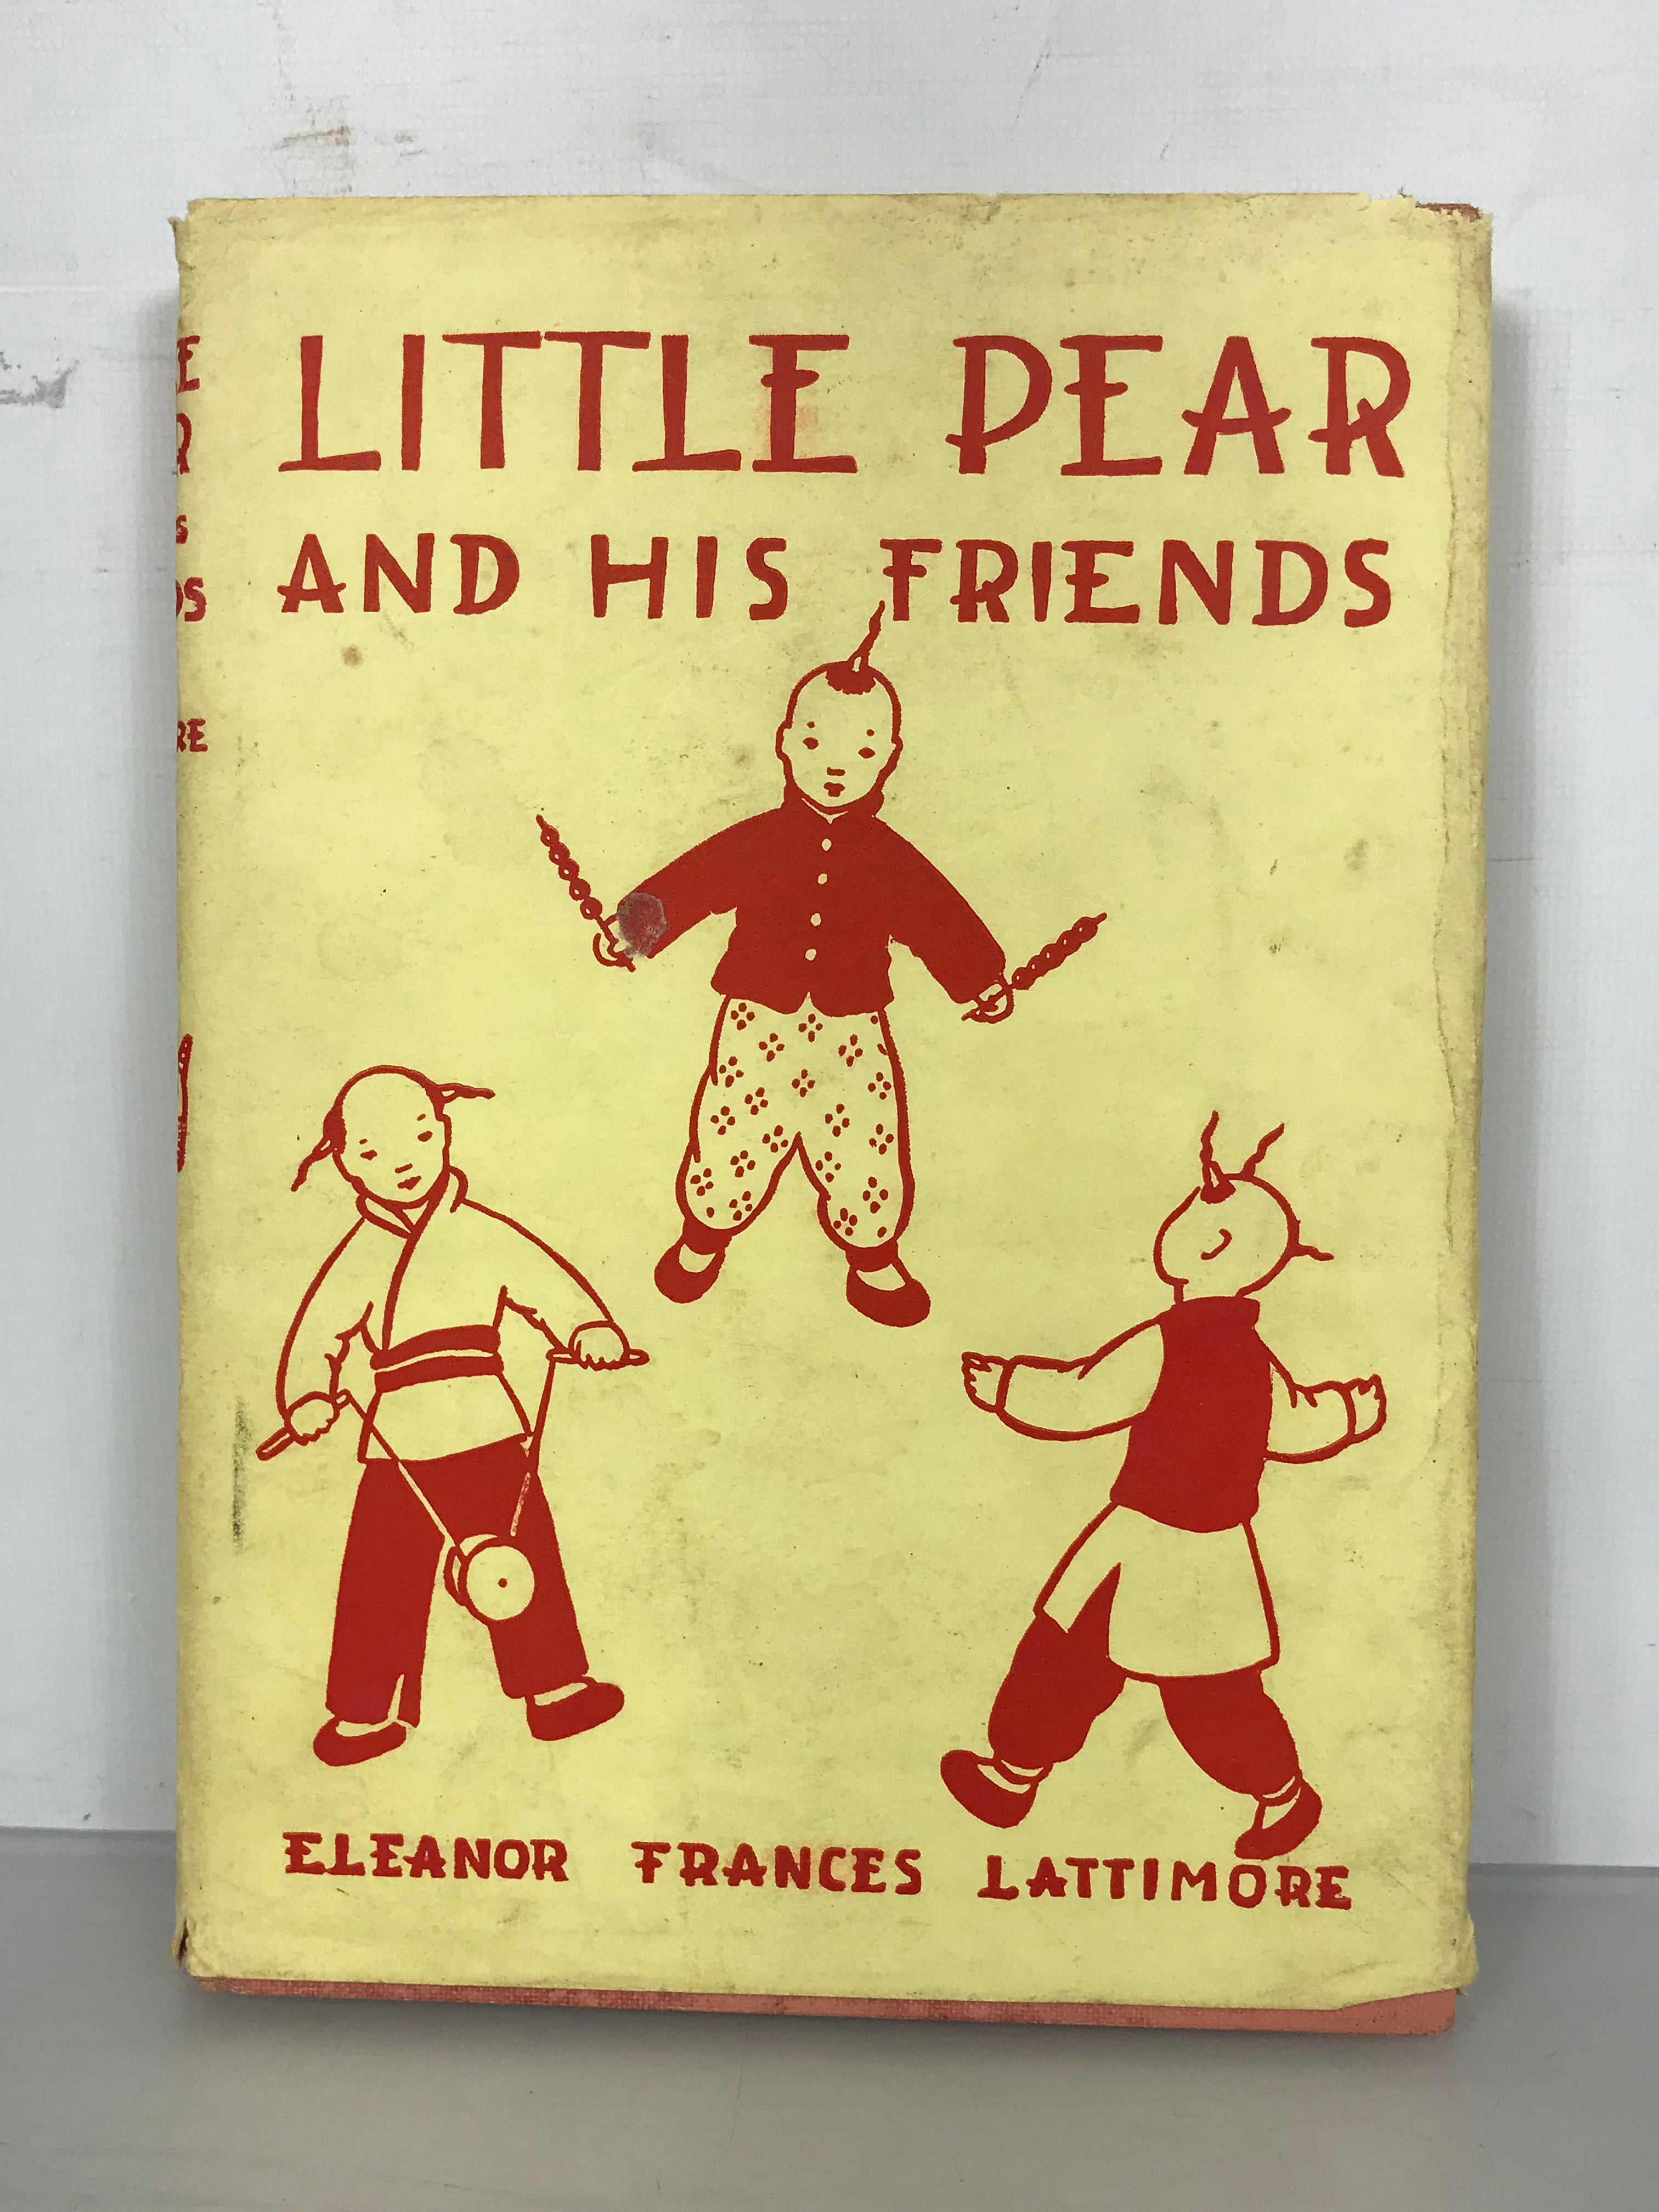 Little Pear and His Friends by Eleanor Frances Lattimore 1962